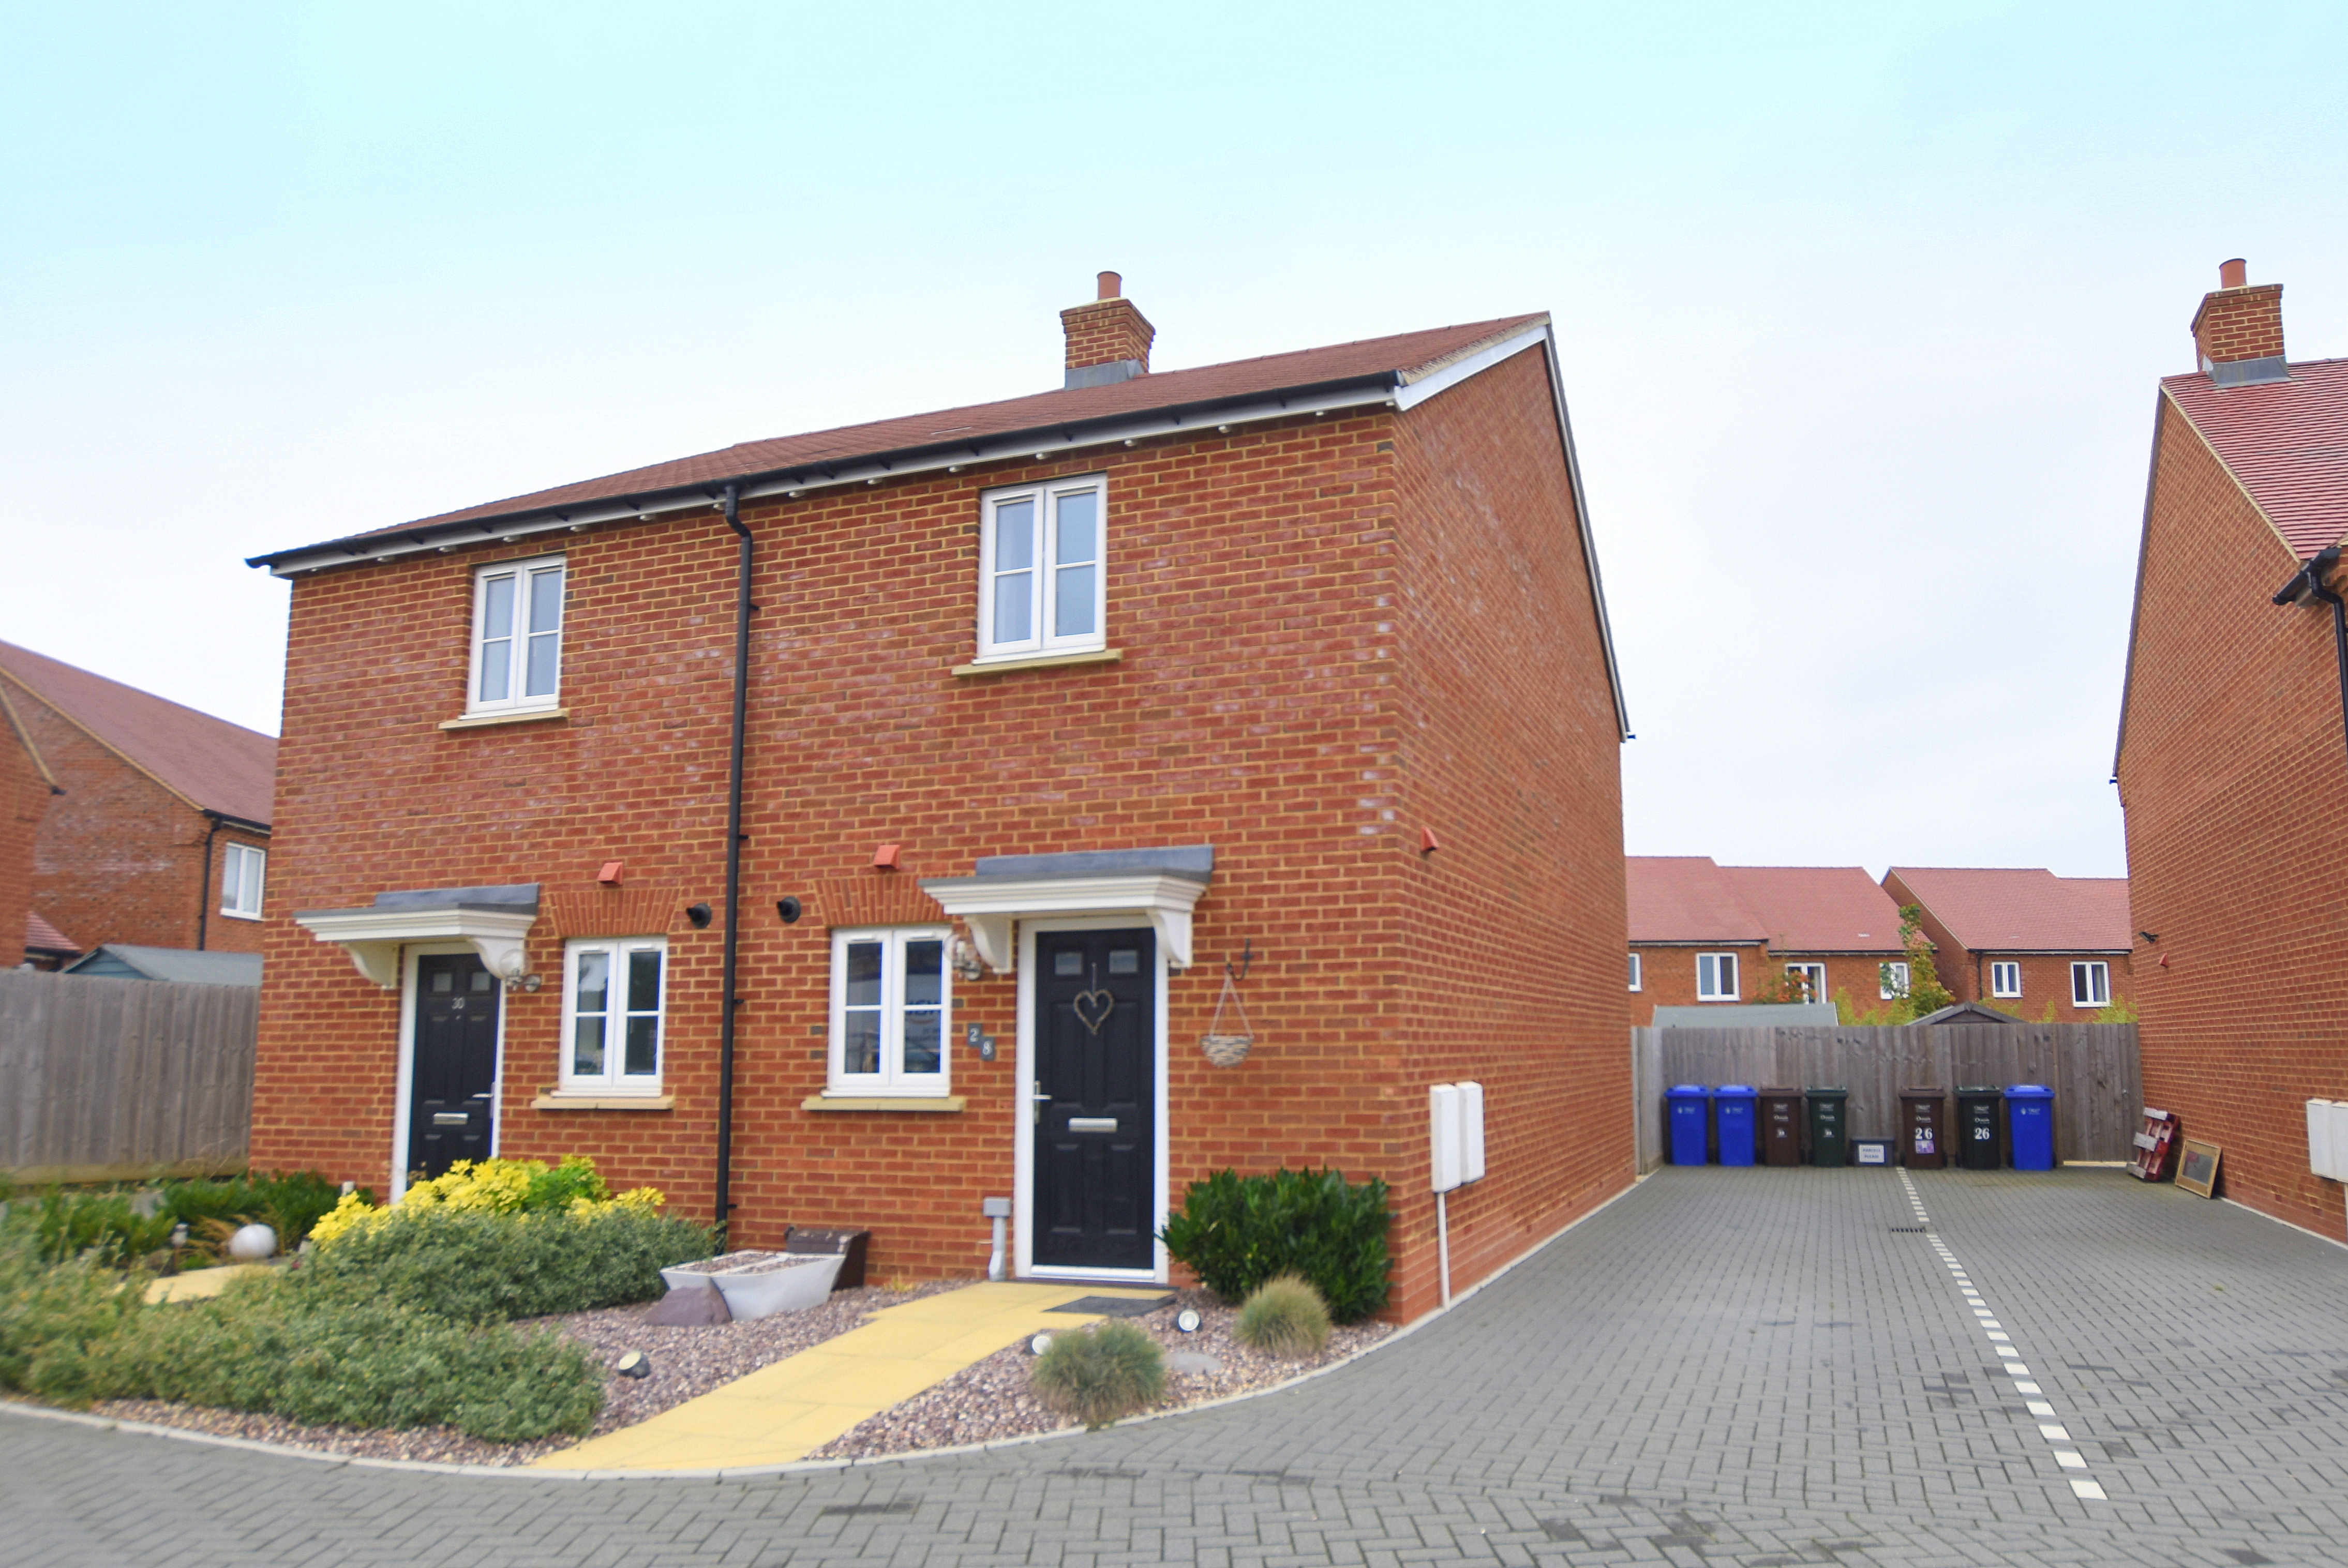 2 bed  for sale in Wardington Road, Banbury  - Property Image 1